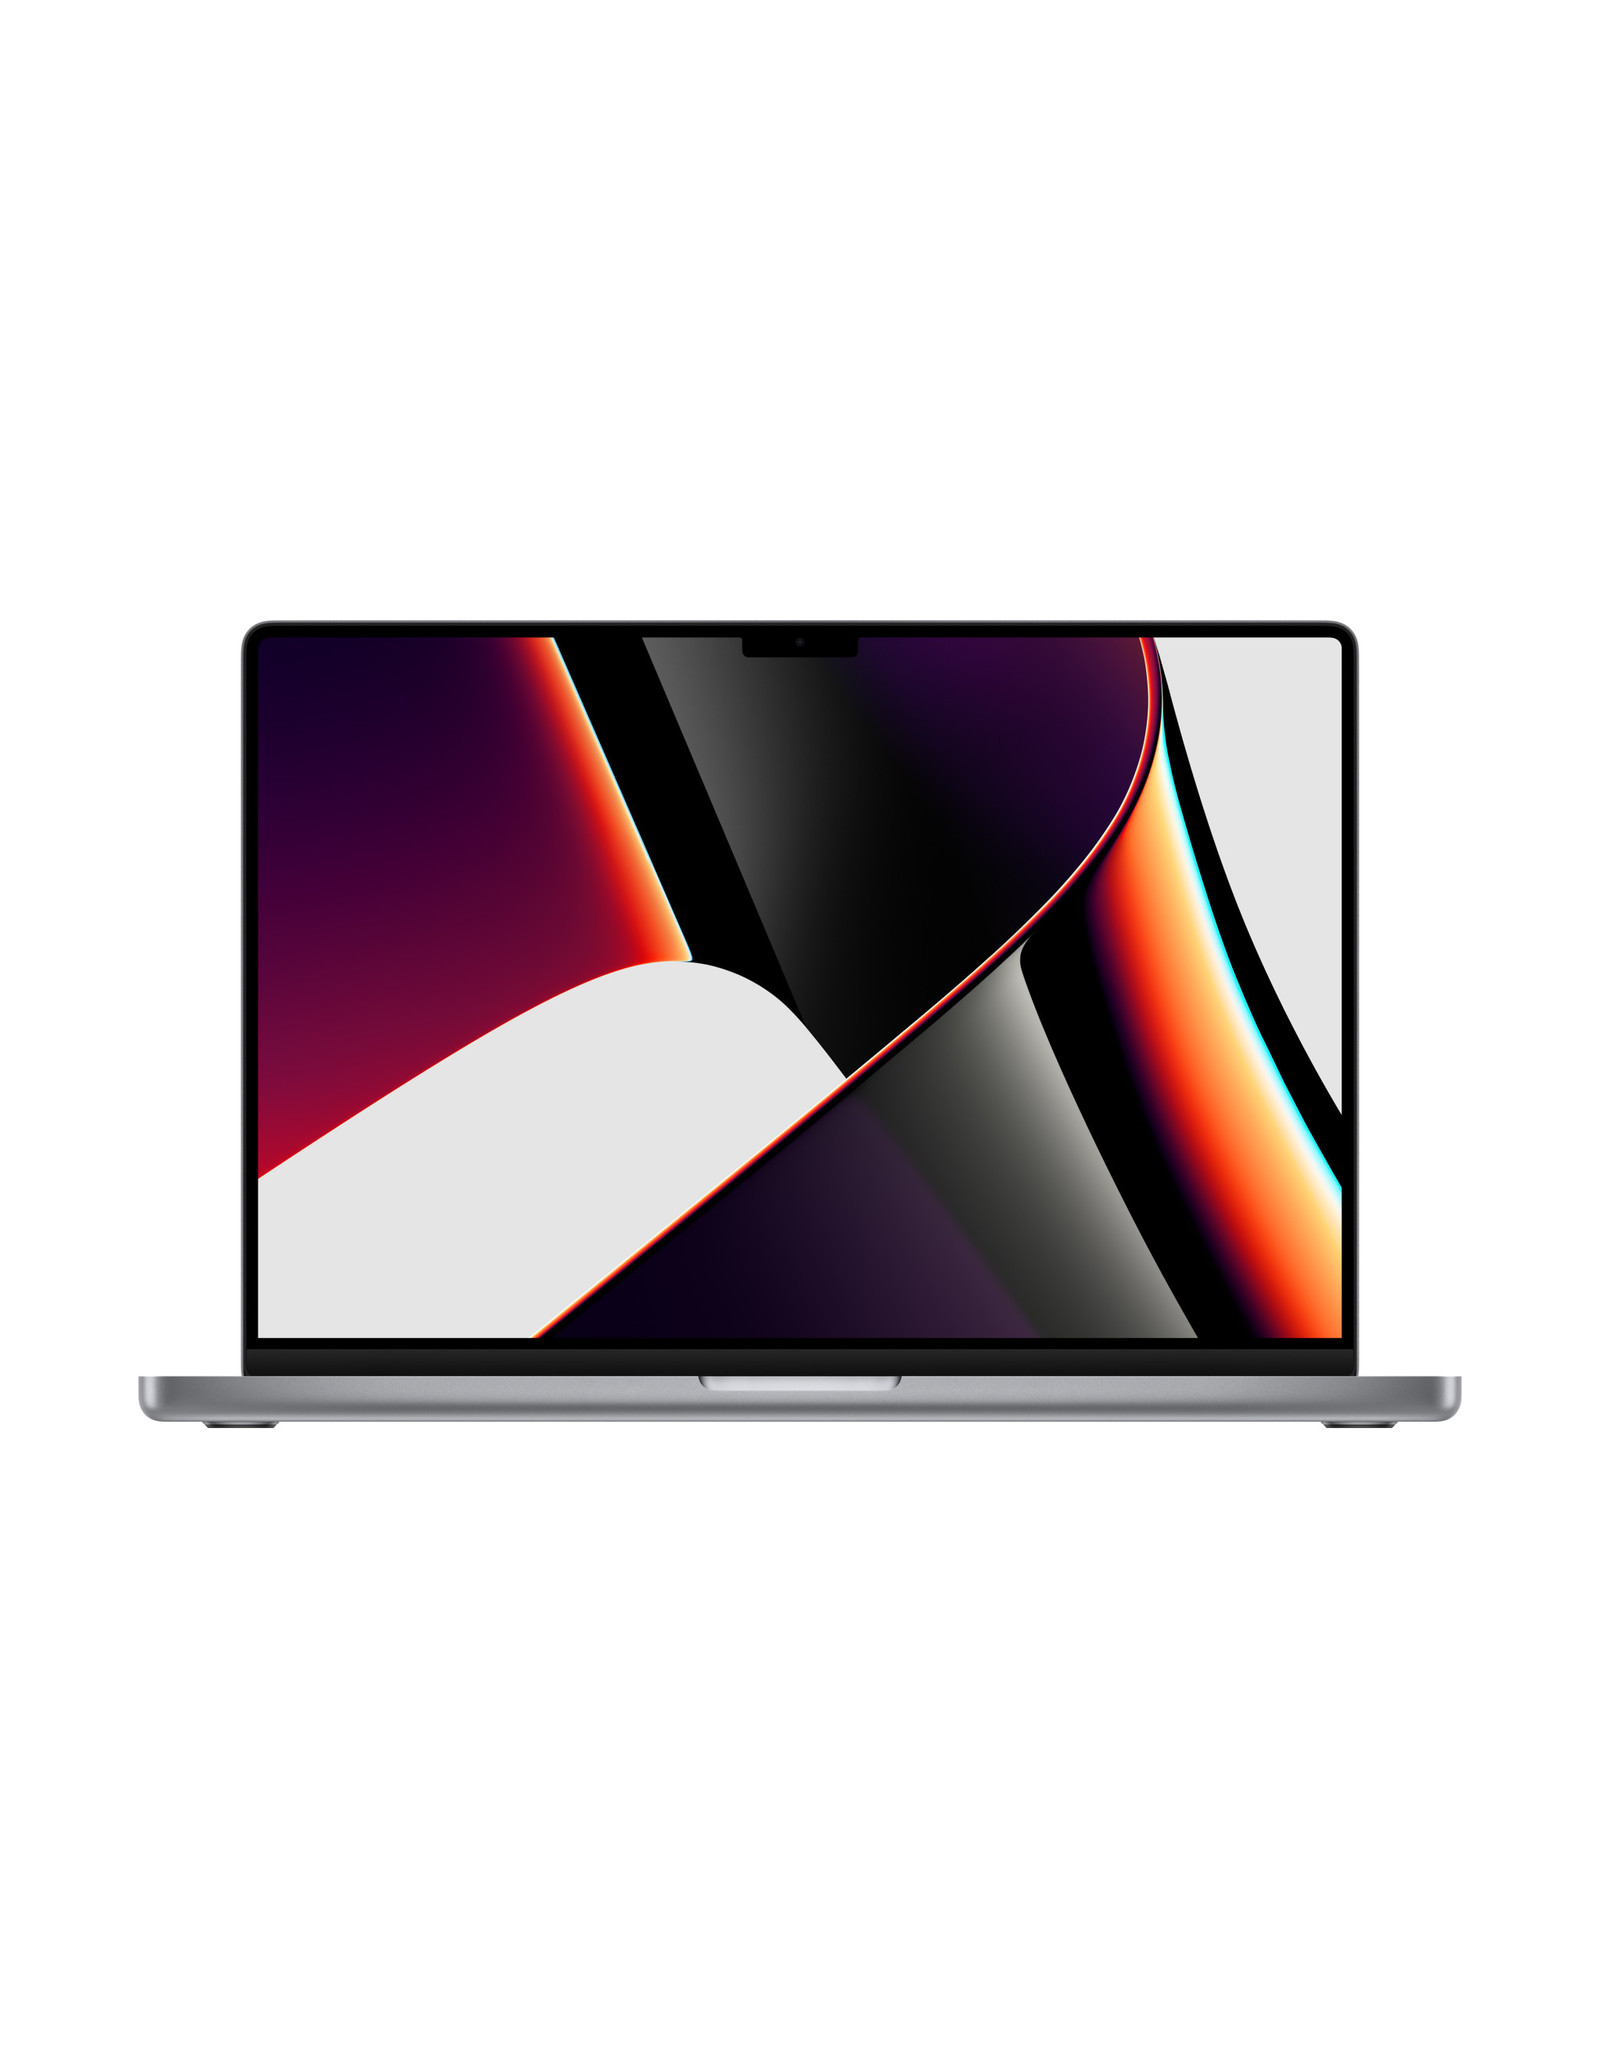 Apple 16-inch MacBook Pro: Apple M1 Pro chip with 10‑core CPU and 16‑core GPU, 512GB SSD - Space Gray